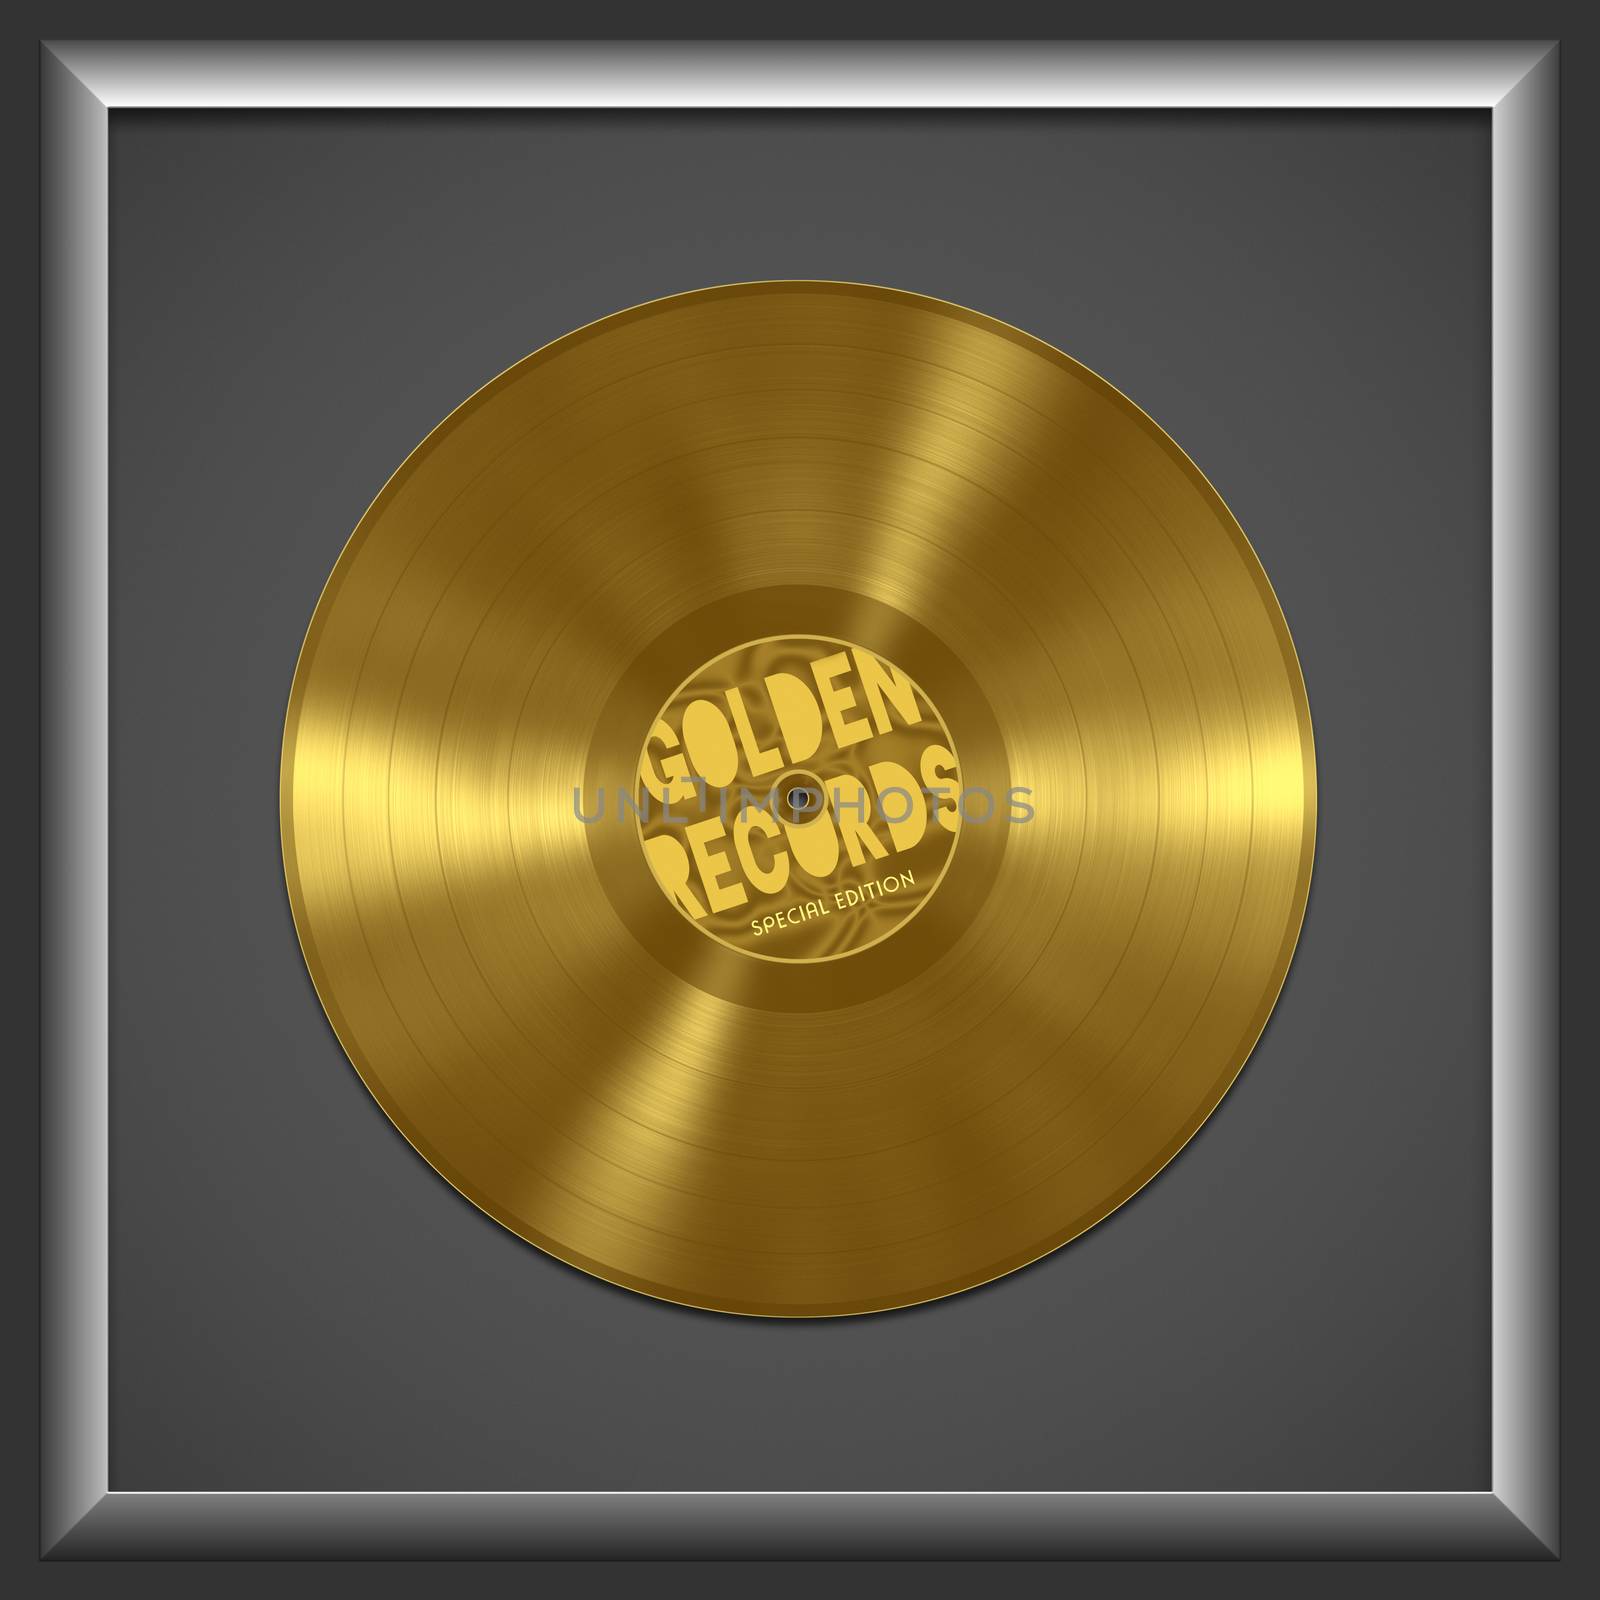 An illustration of an old vinyl golden record